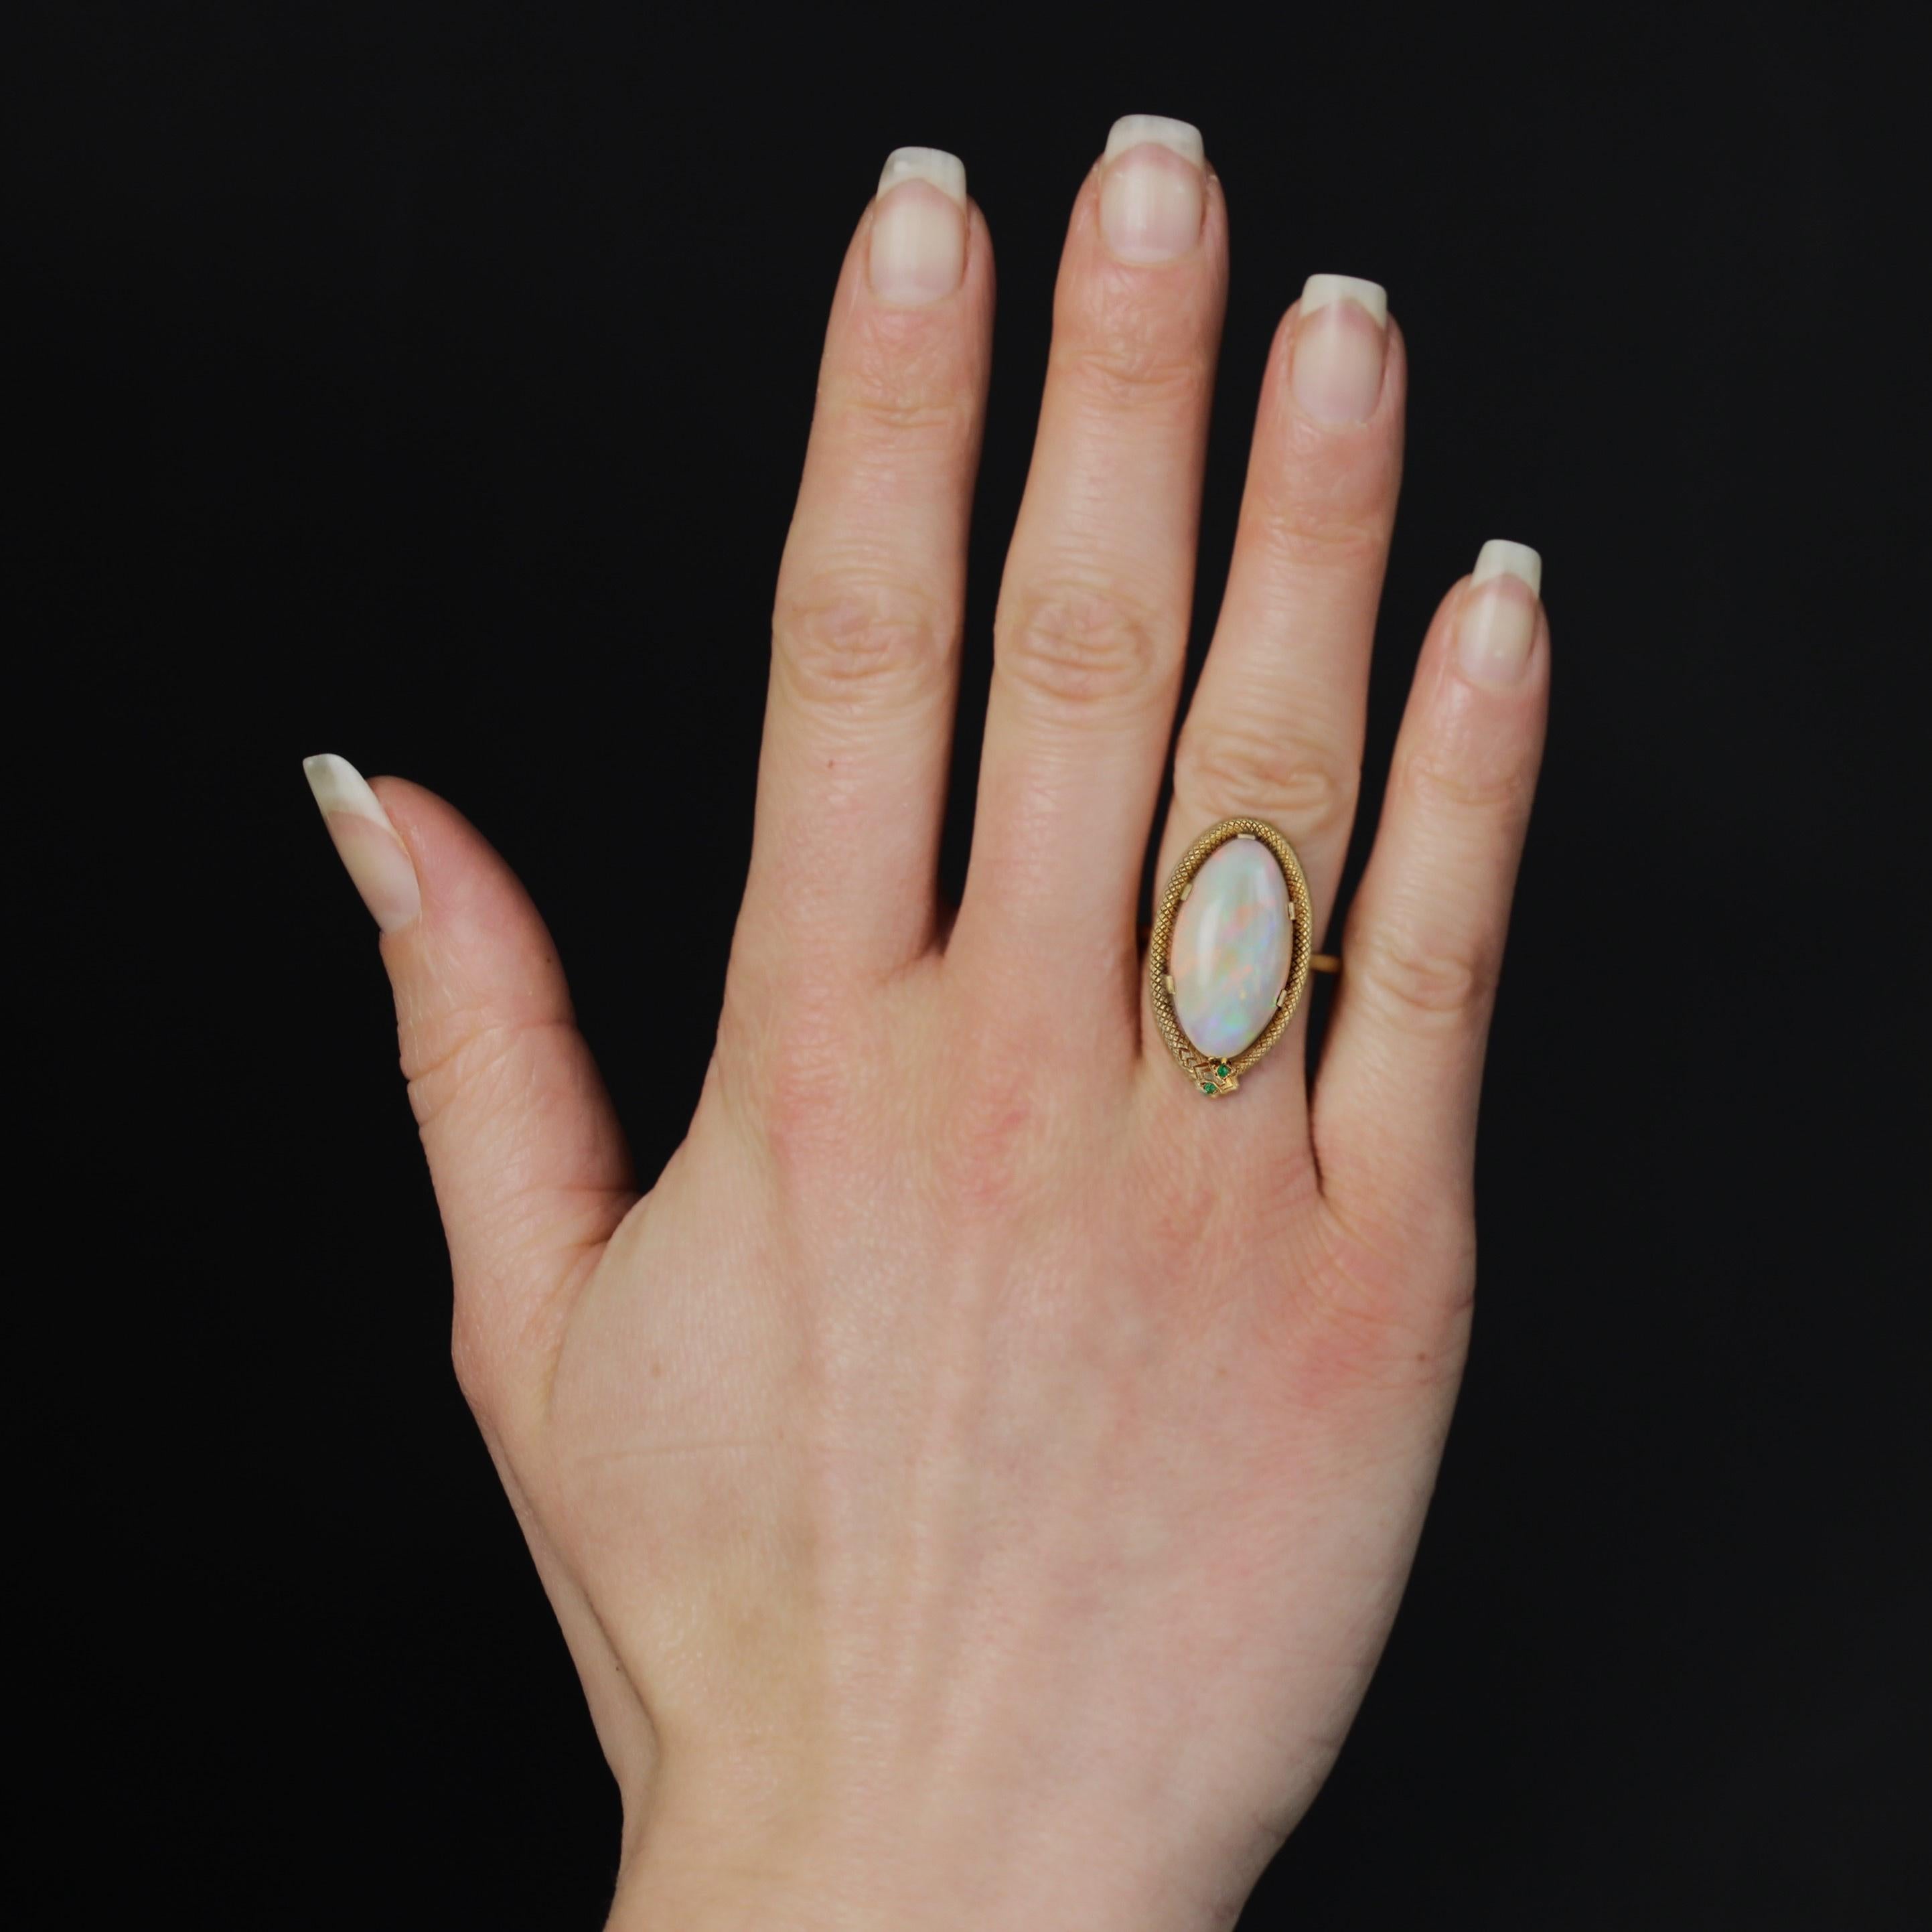 Ring in 18 karat yellow gold, eagle head hallmark.
This astonishing antique ring features a large oval cabochon opal on top, held in place by 6 flat claws and surrounded by a coiled snake, whose eyes are represented by 2 small emeralds.
Weight of